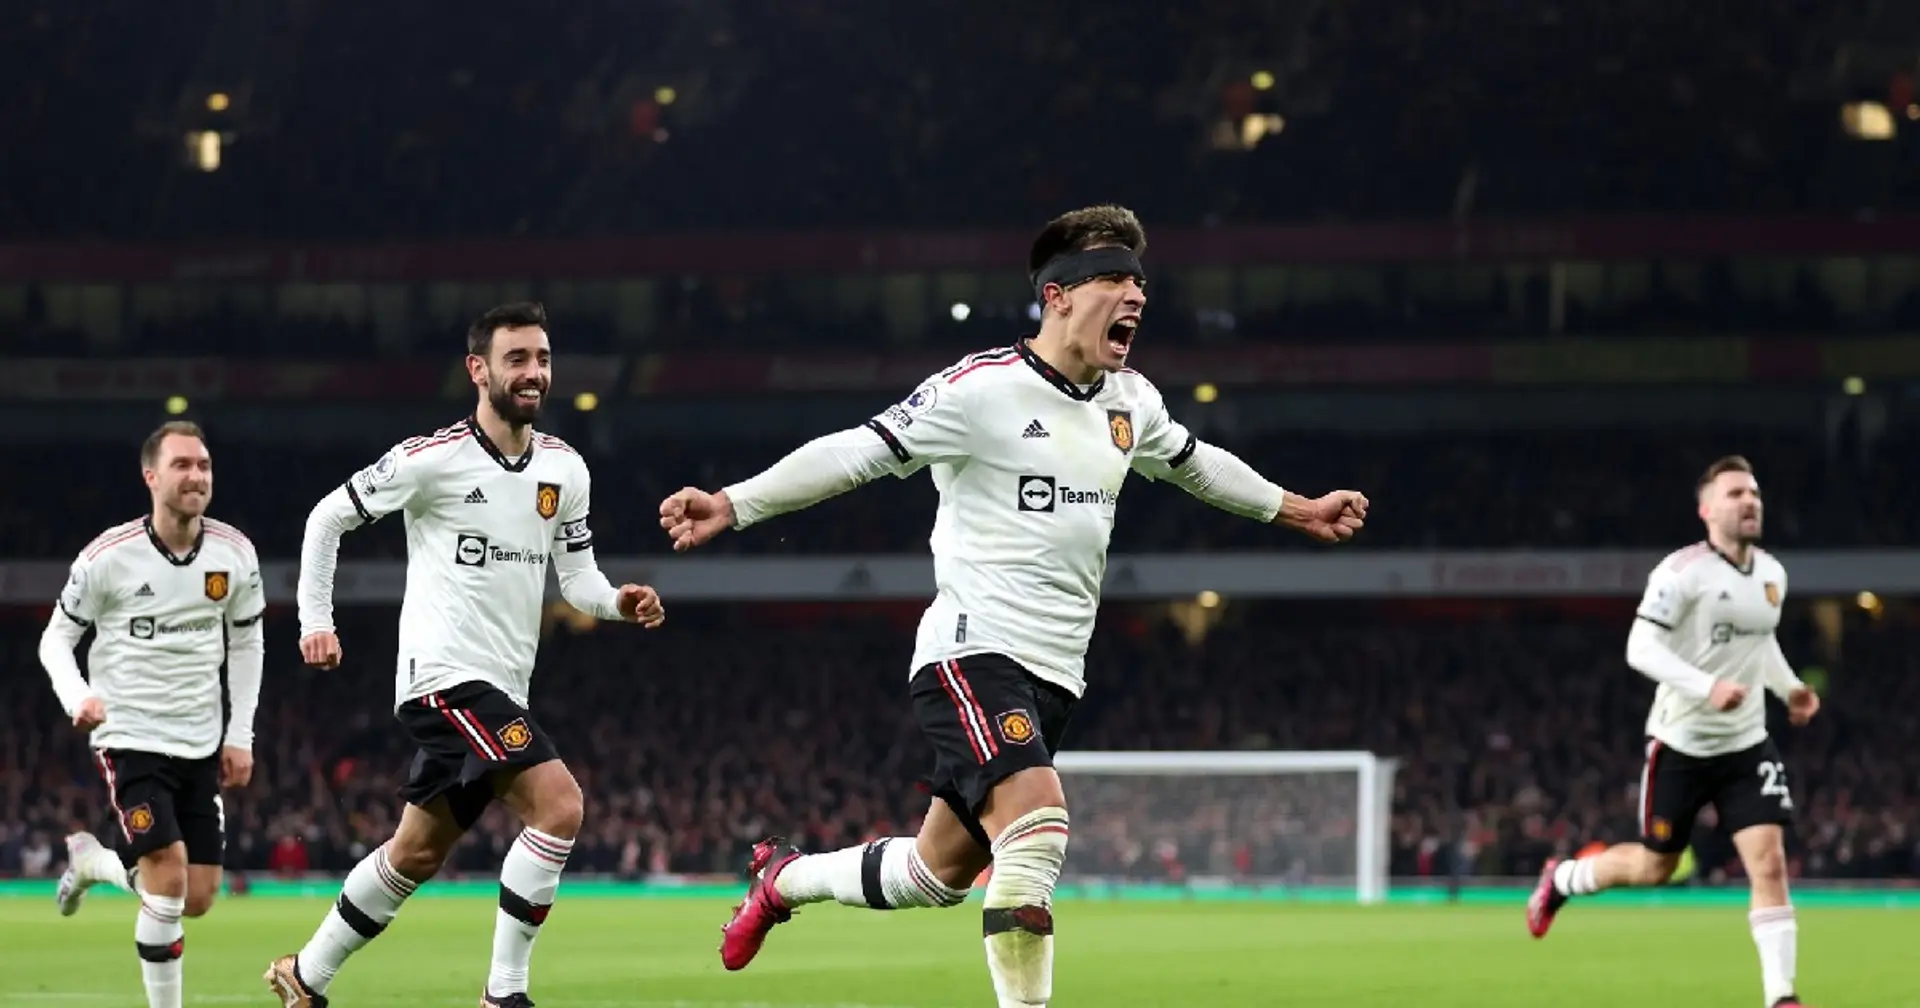 Martinez - 9, McTominay - 5: rating Man United players in Arsenal defeat